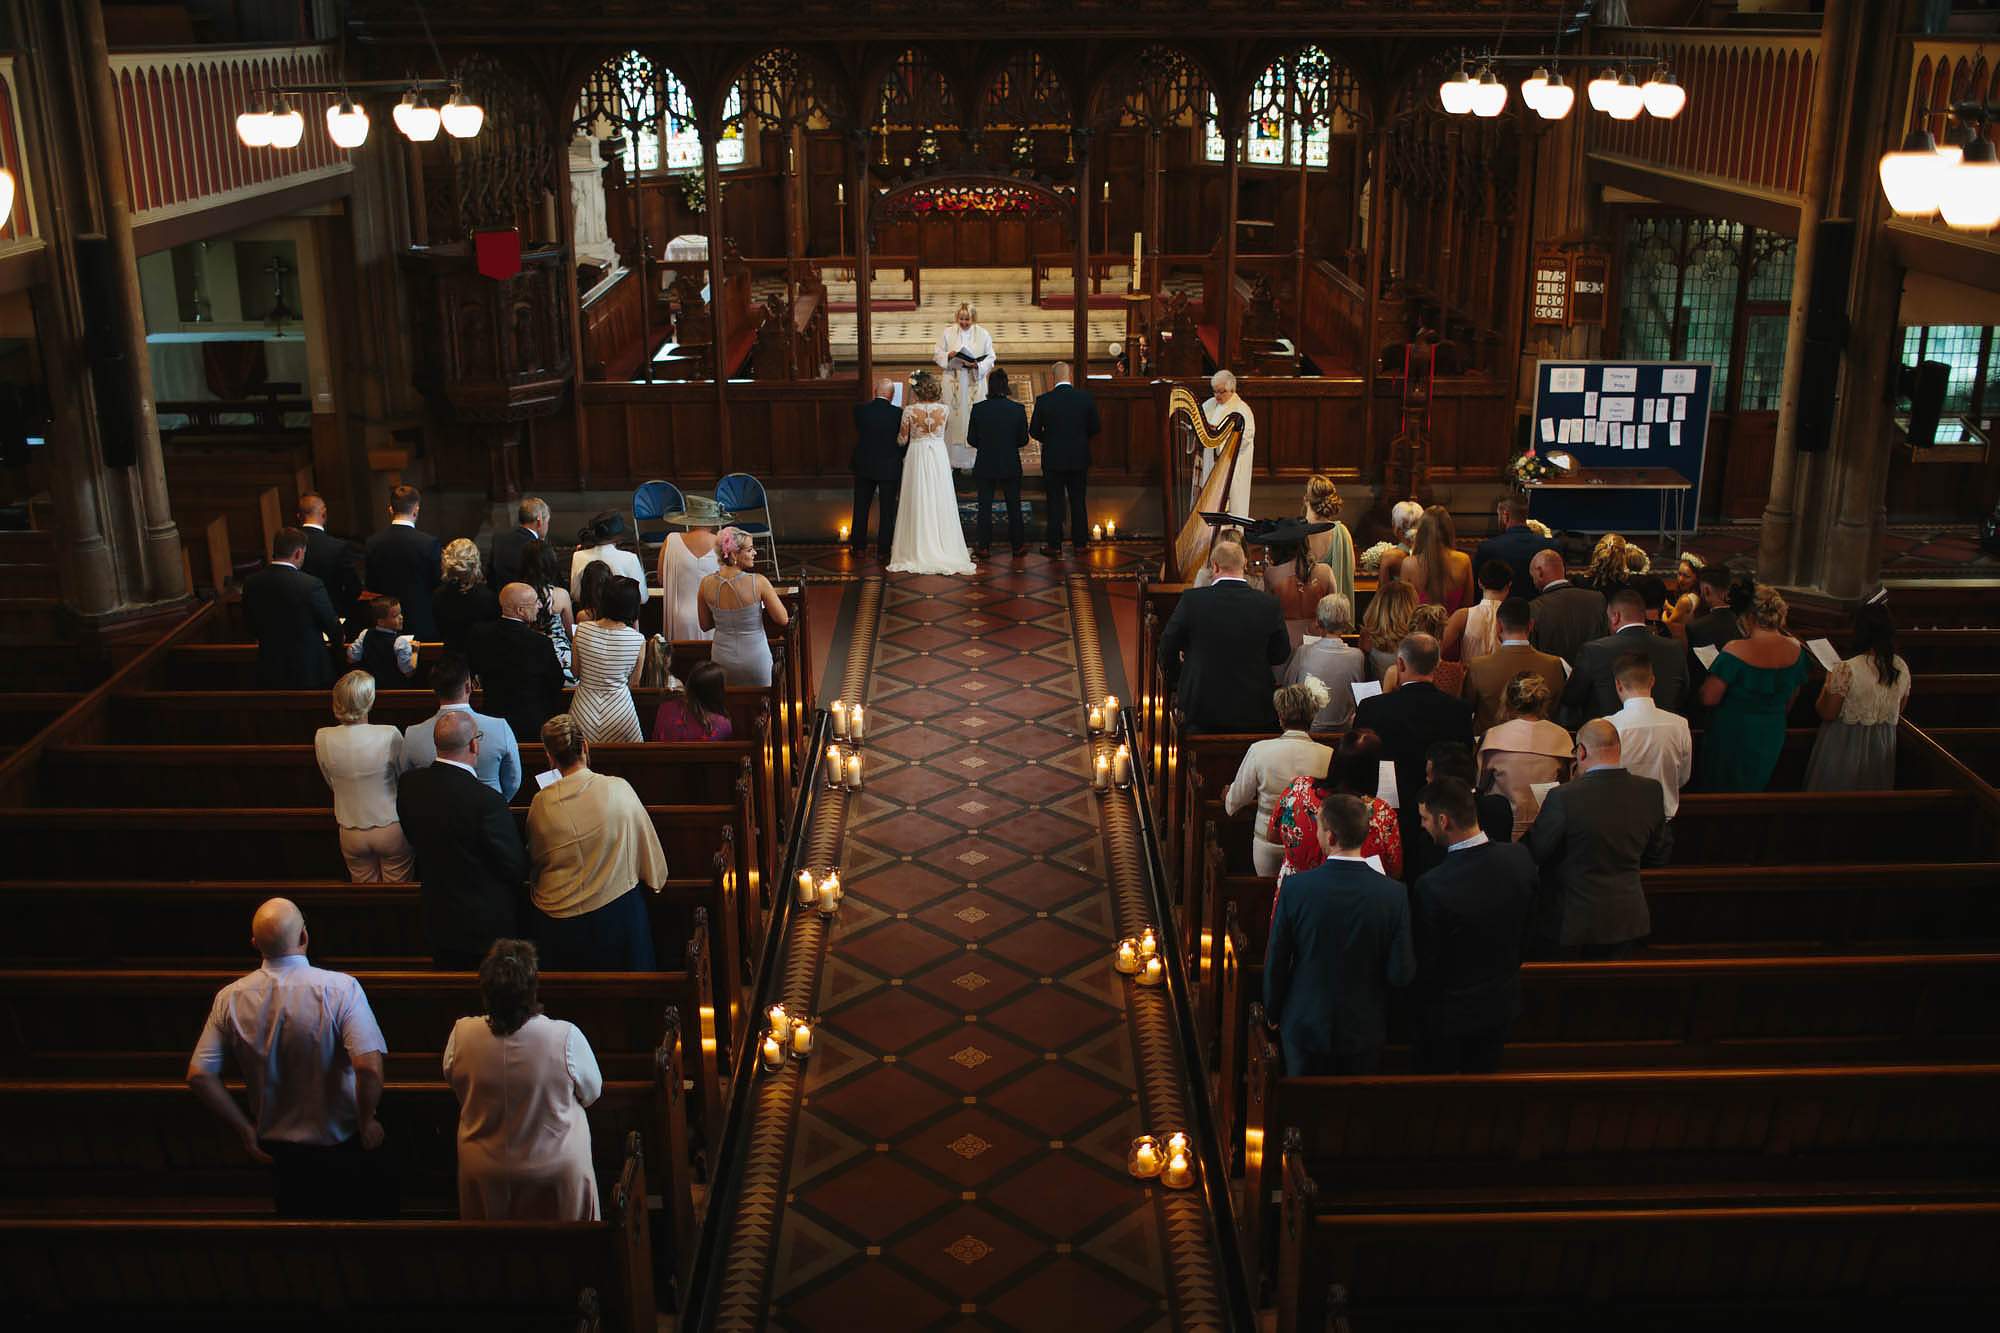 Bride and groom getting married in a church in Manchester